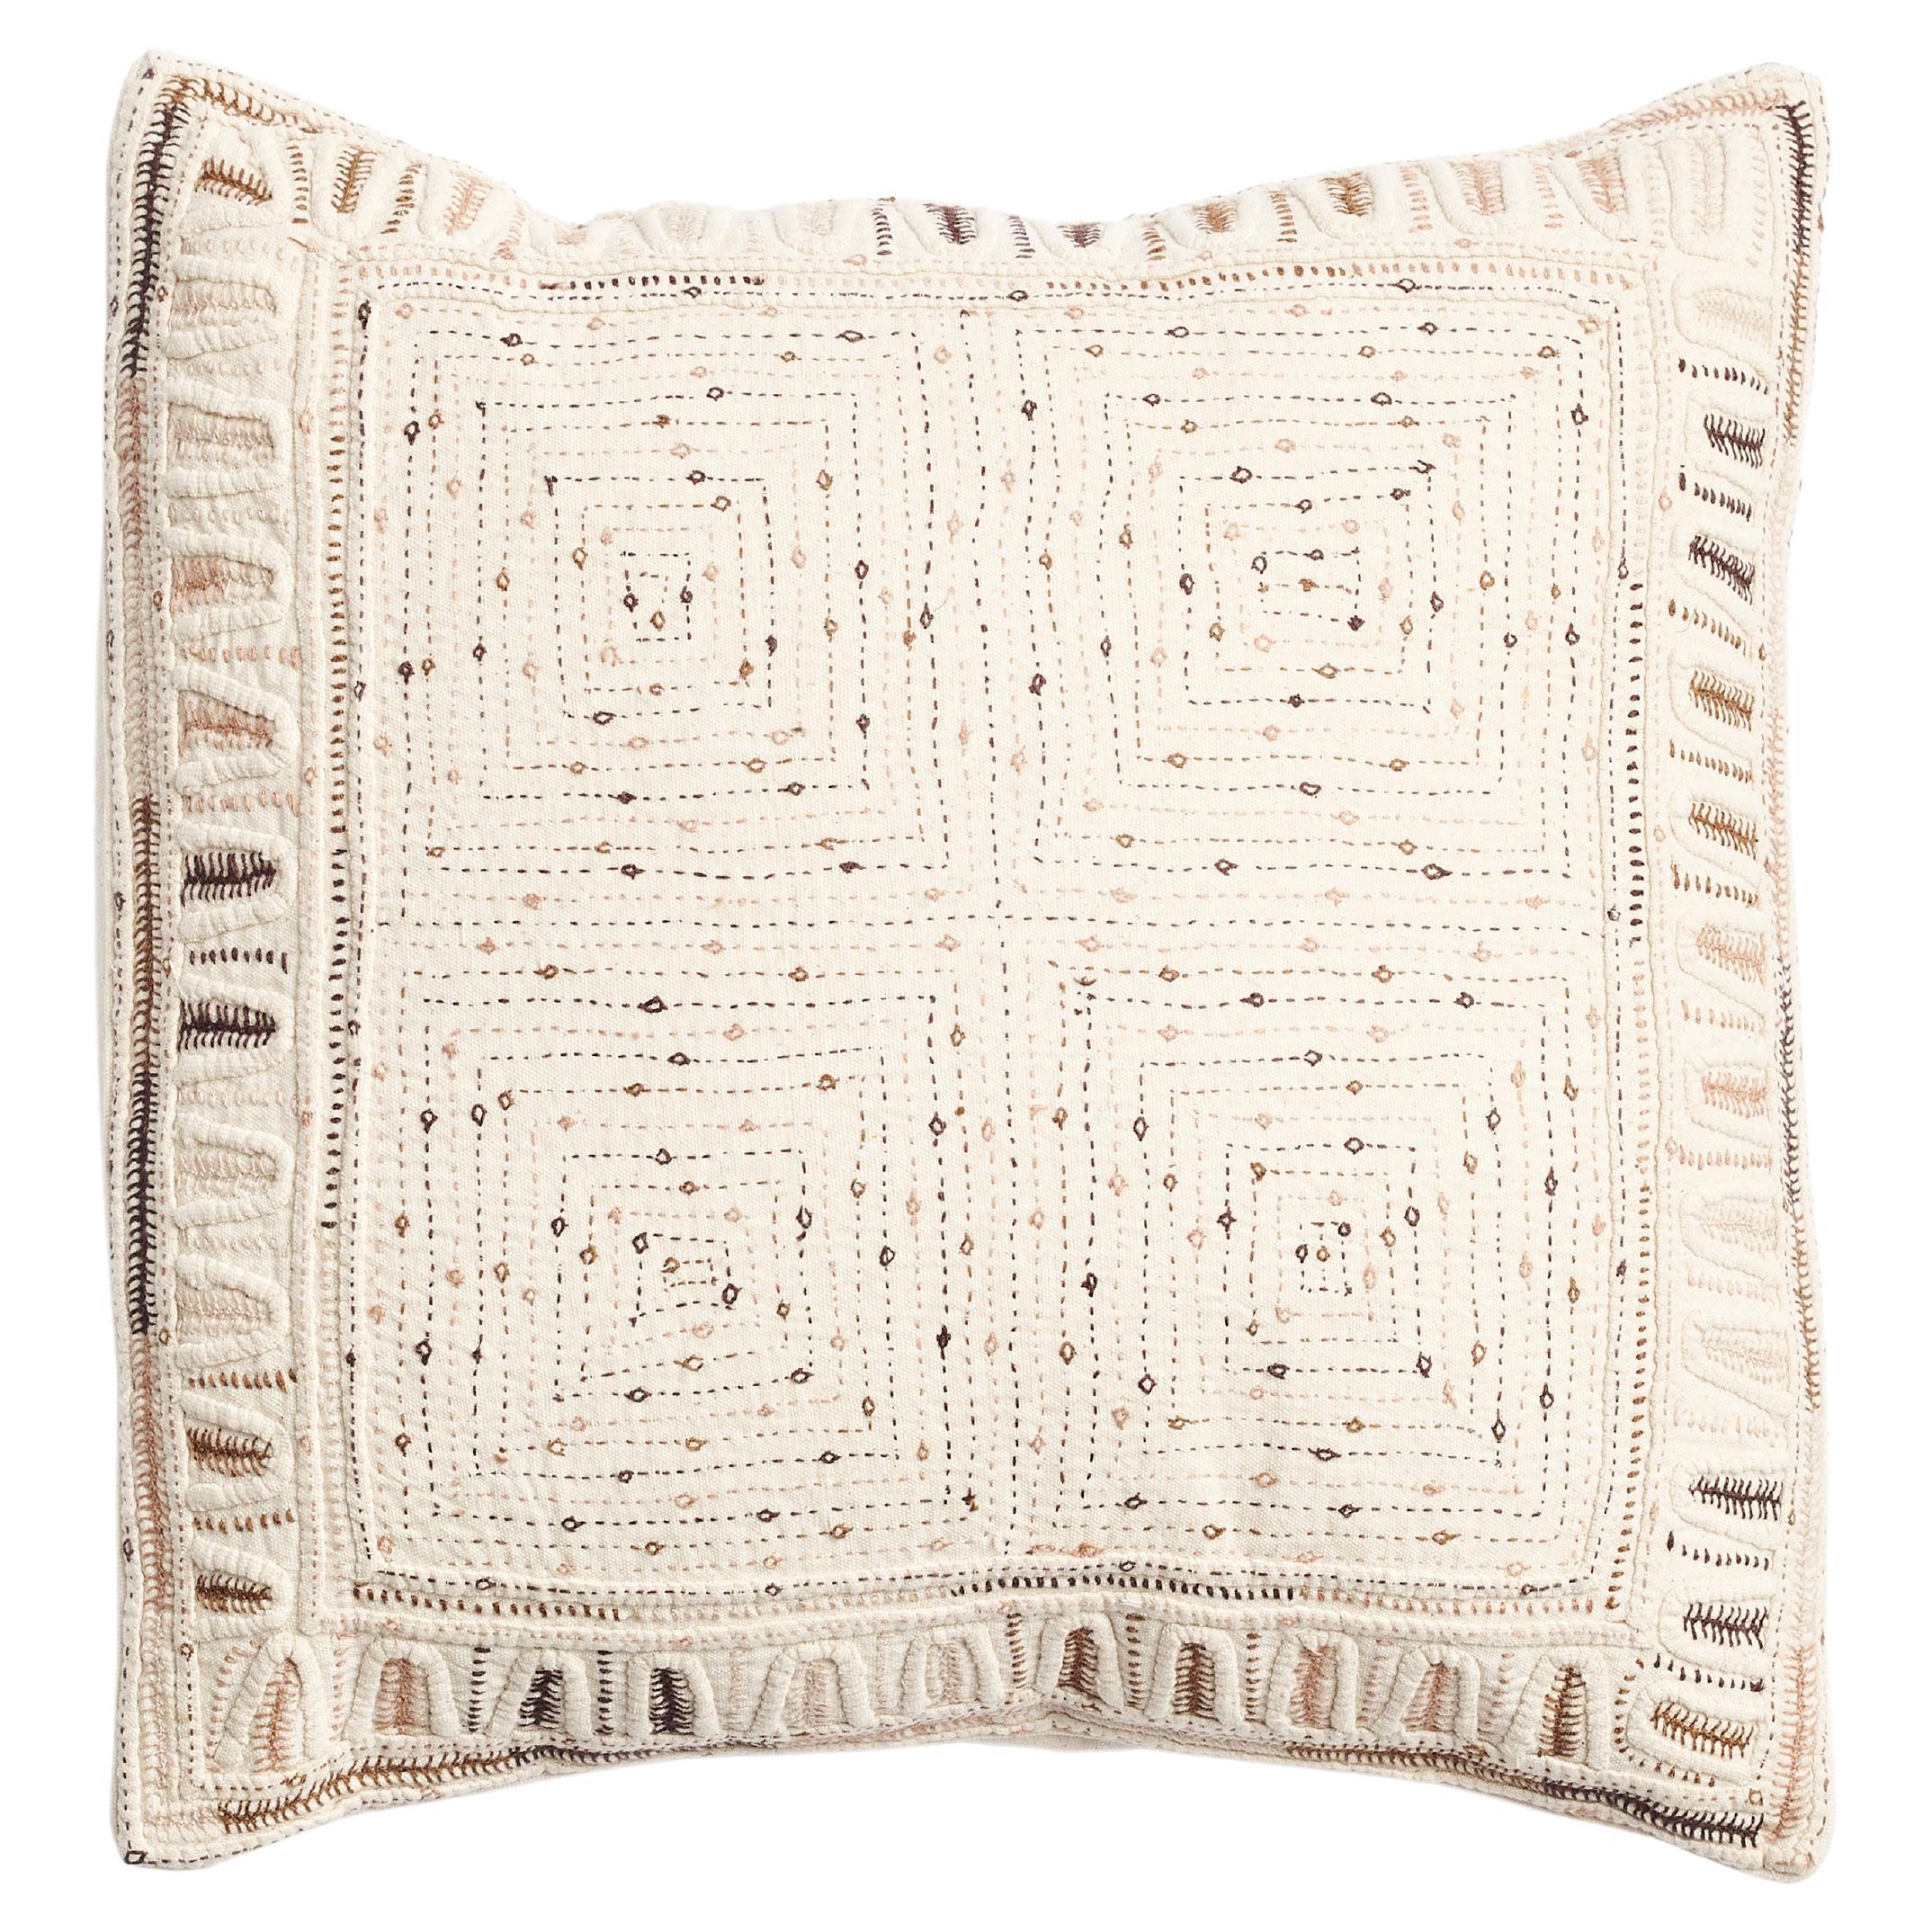 Maze Brown Pillow Hand Embroidered on Handwoven Organic Cotton by Artisans